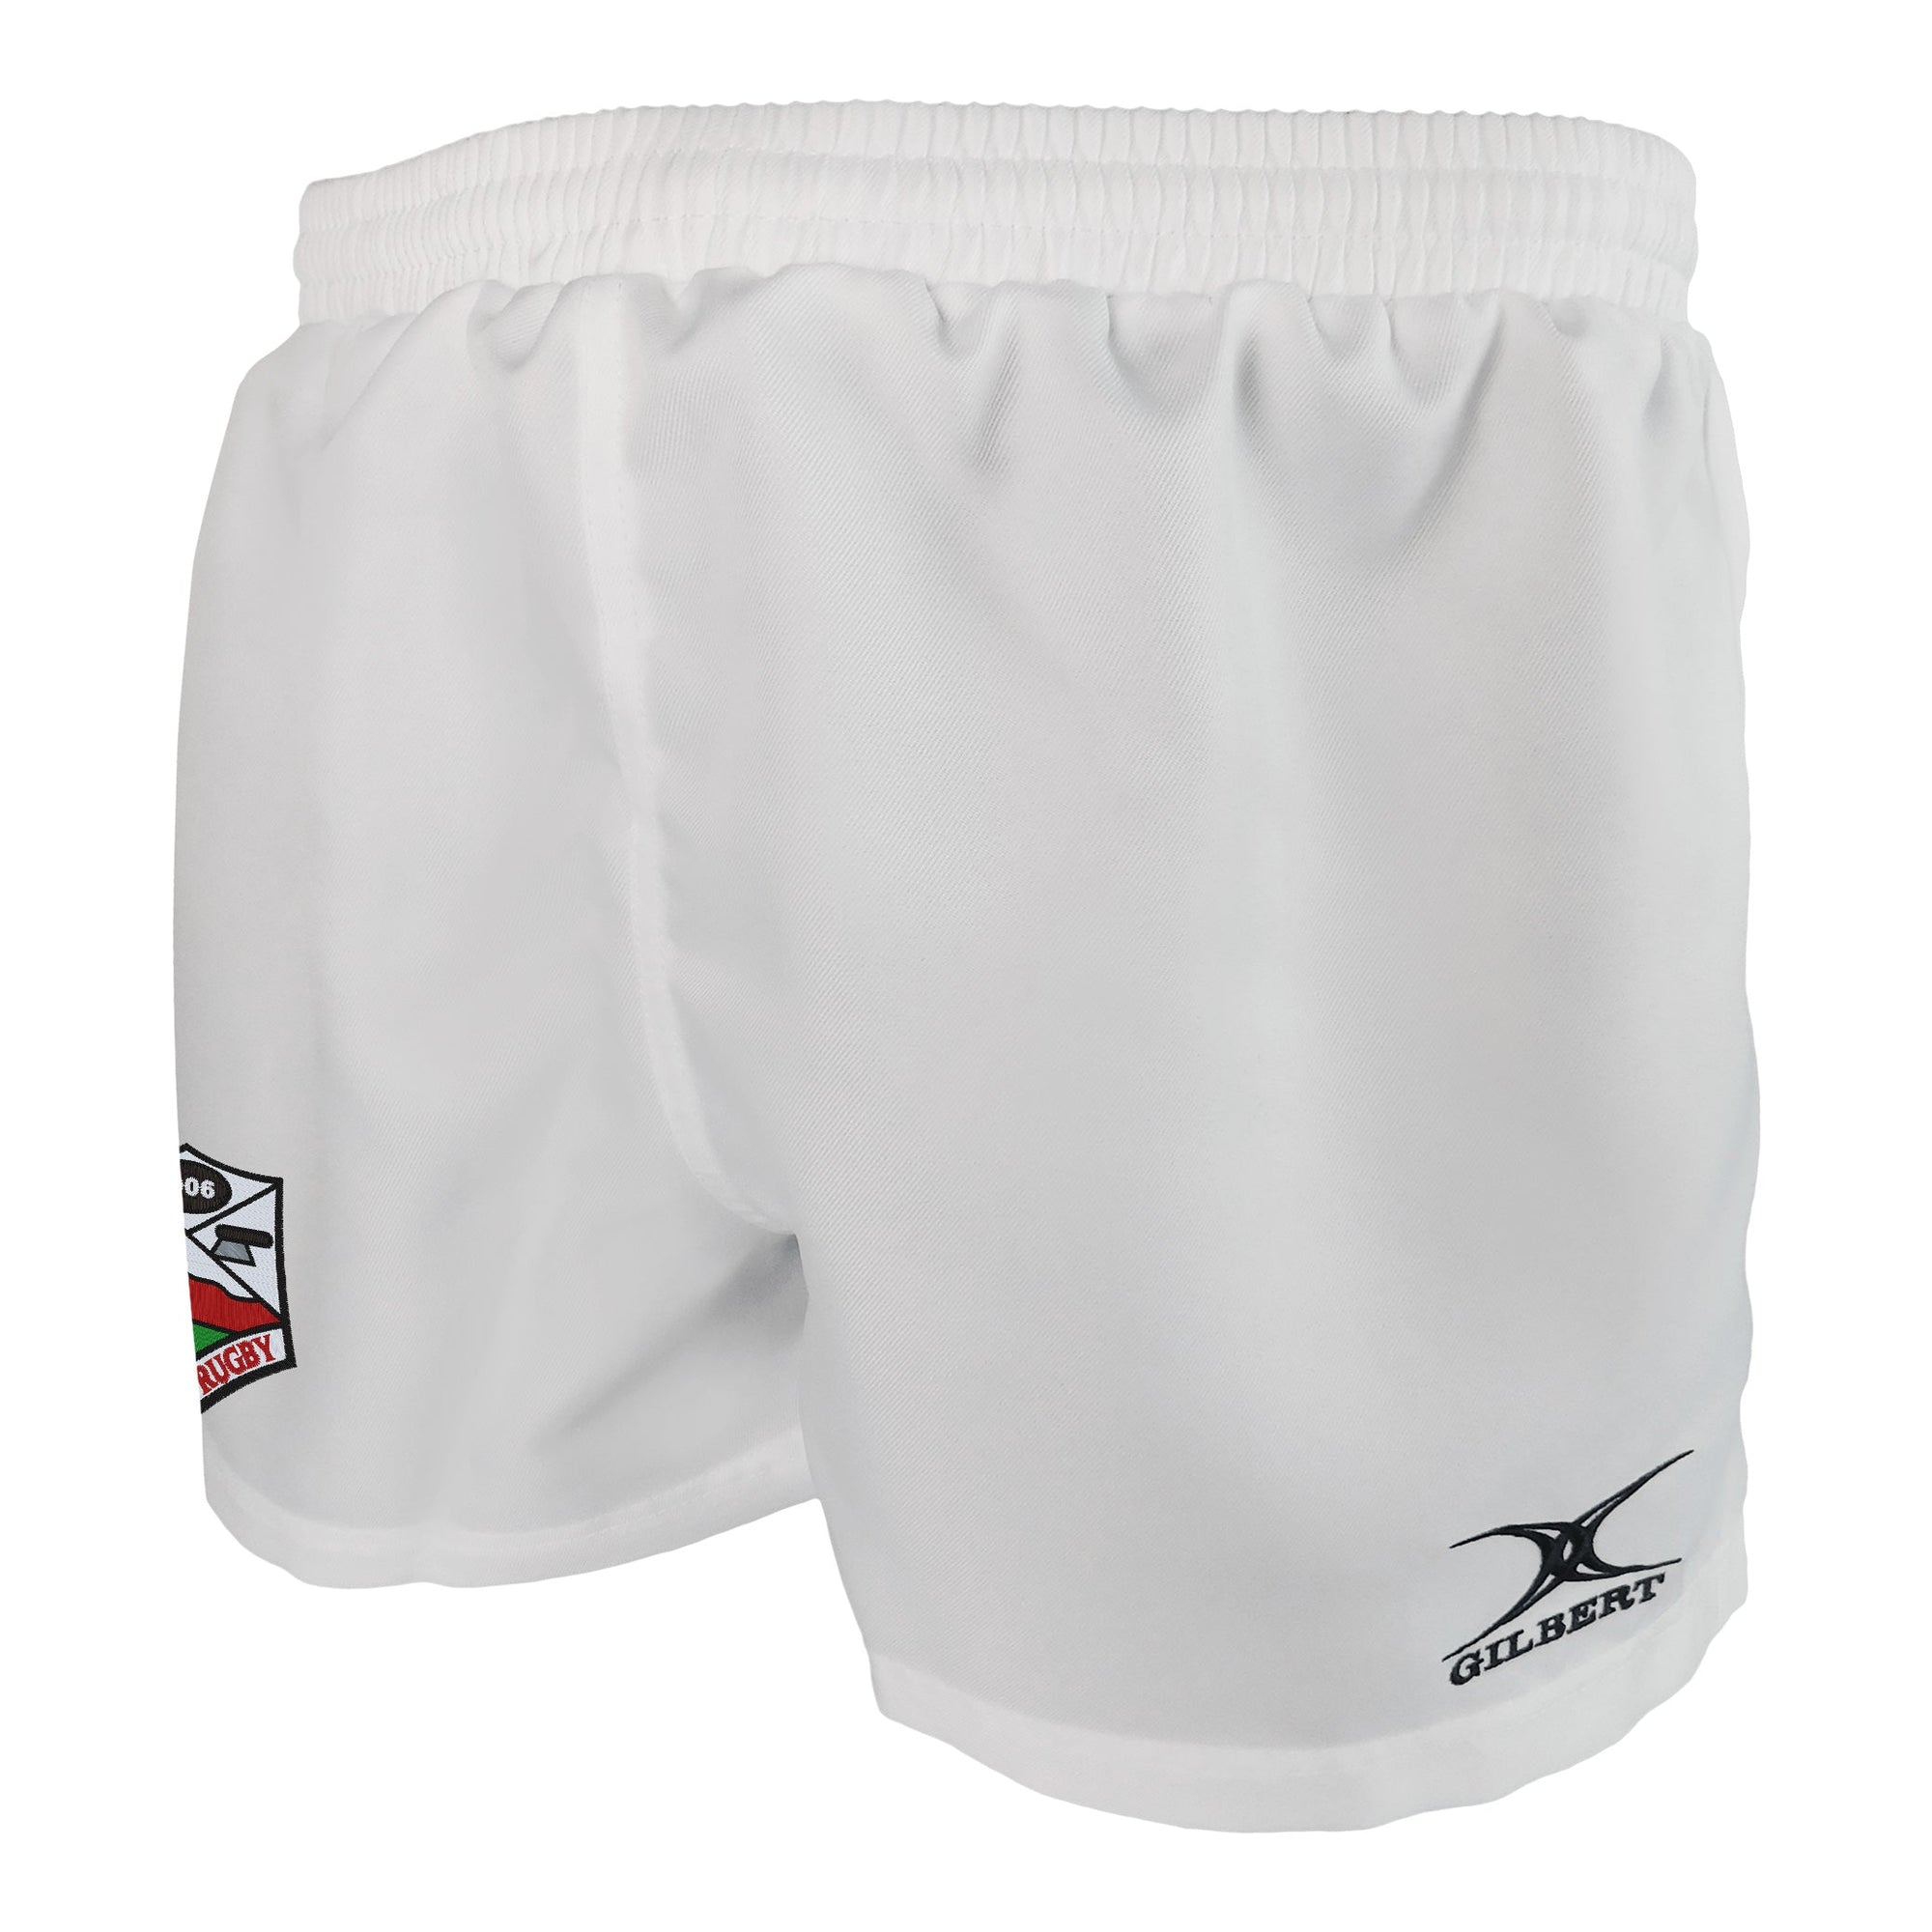 Rugby Imports Stanford Rugby Saracen Rugby Shorts